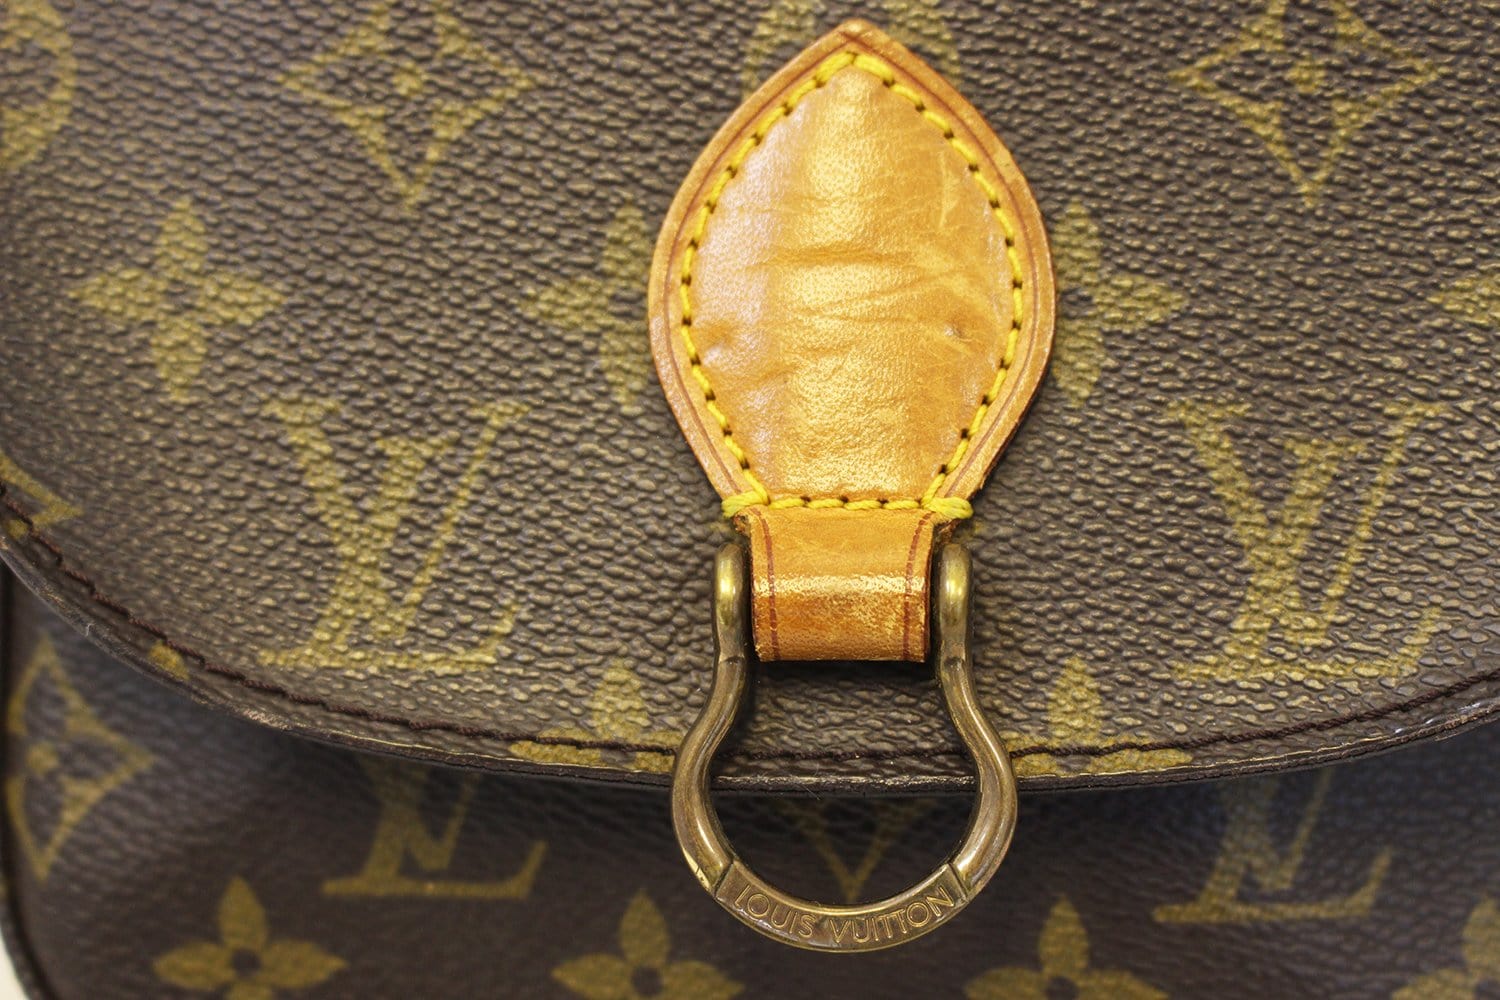 I need help finding the Louis Vuitton Saint Cloud in a size GM : r